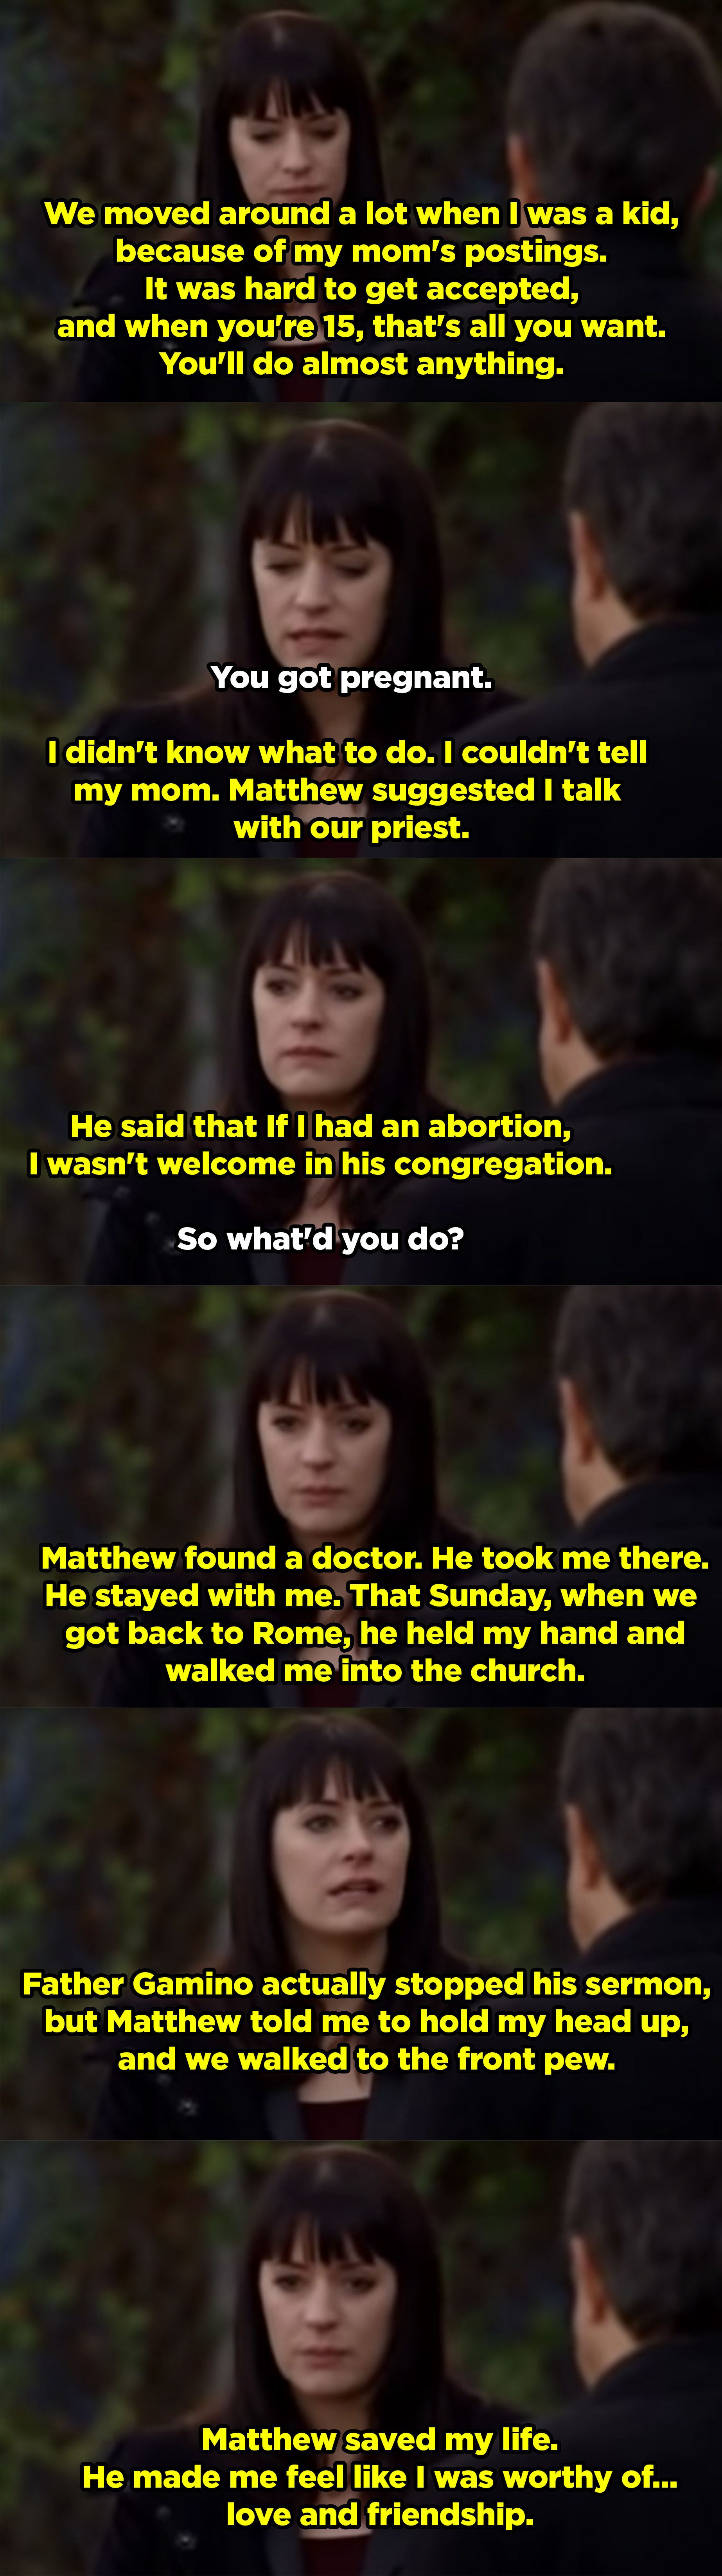 Emily explaining to Rossi that she got pregnant as a teenager and her friend Matthew helped her get an abortion, and then afterwards he started to question his religion. 